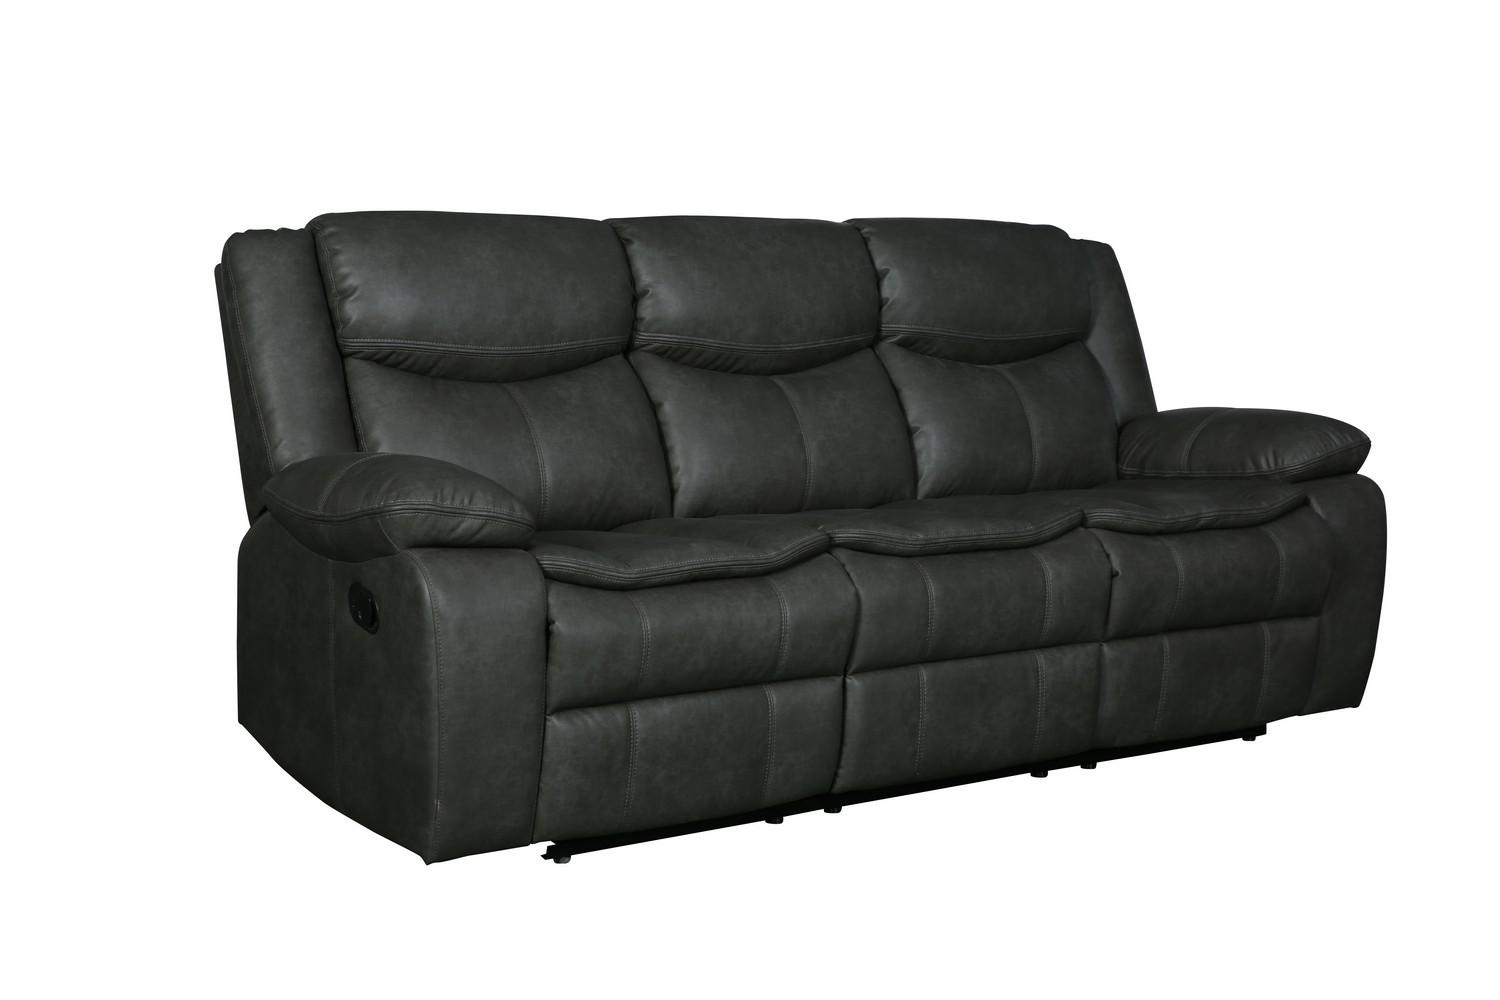 

    
Contemporary Gray Leather Air Reclining Sofa Global United 6967 6967-GRAY-S
